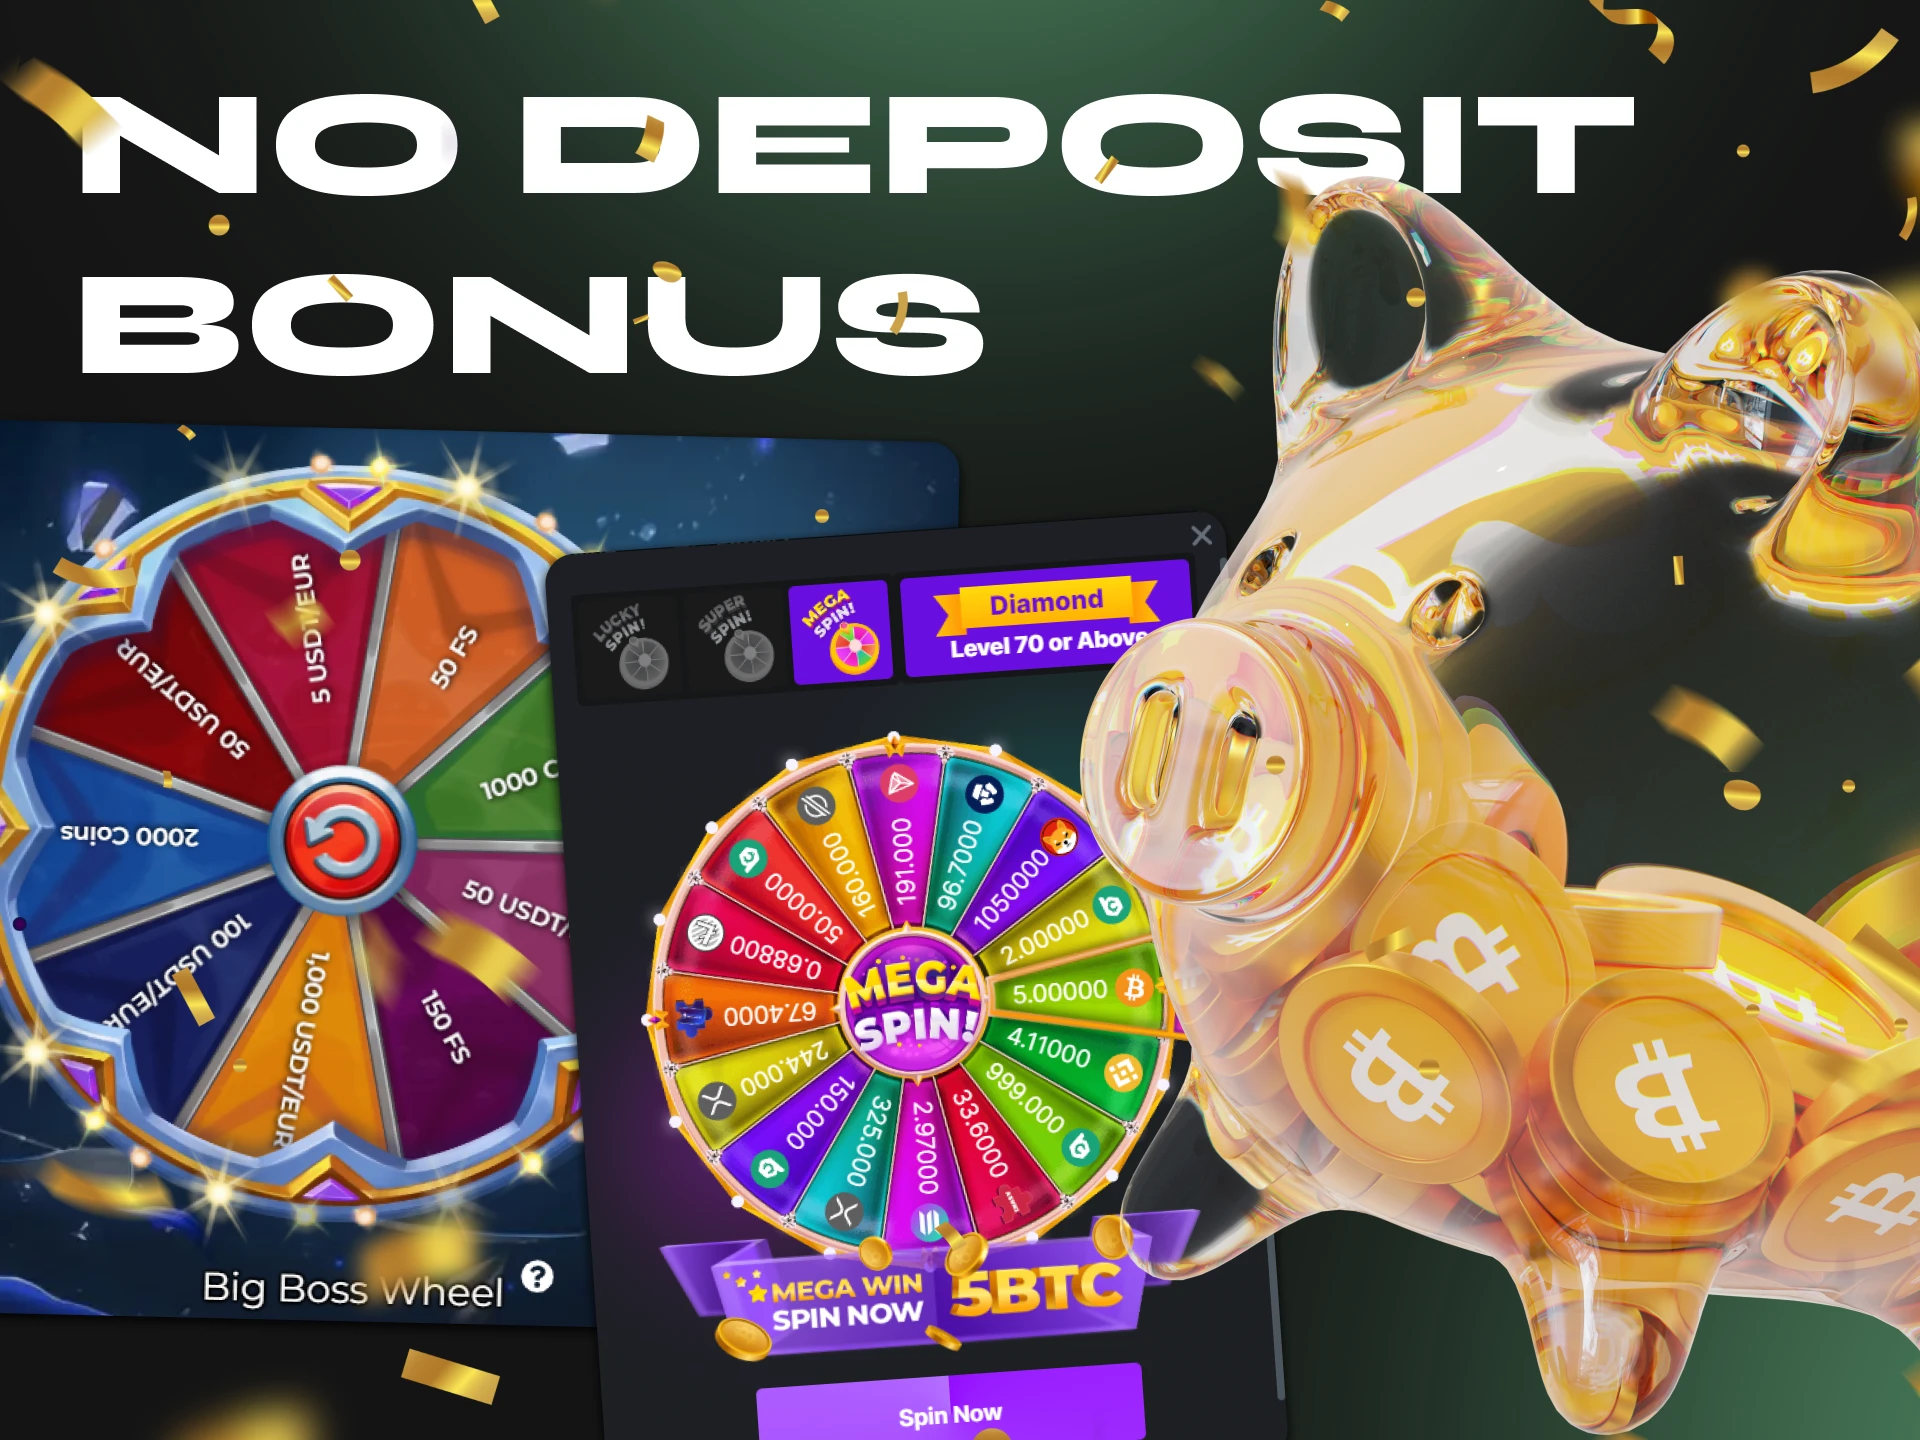 A no deposit bonus is a good way to try blackjack without depositing any money.